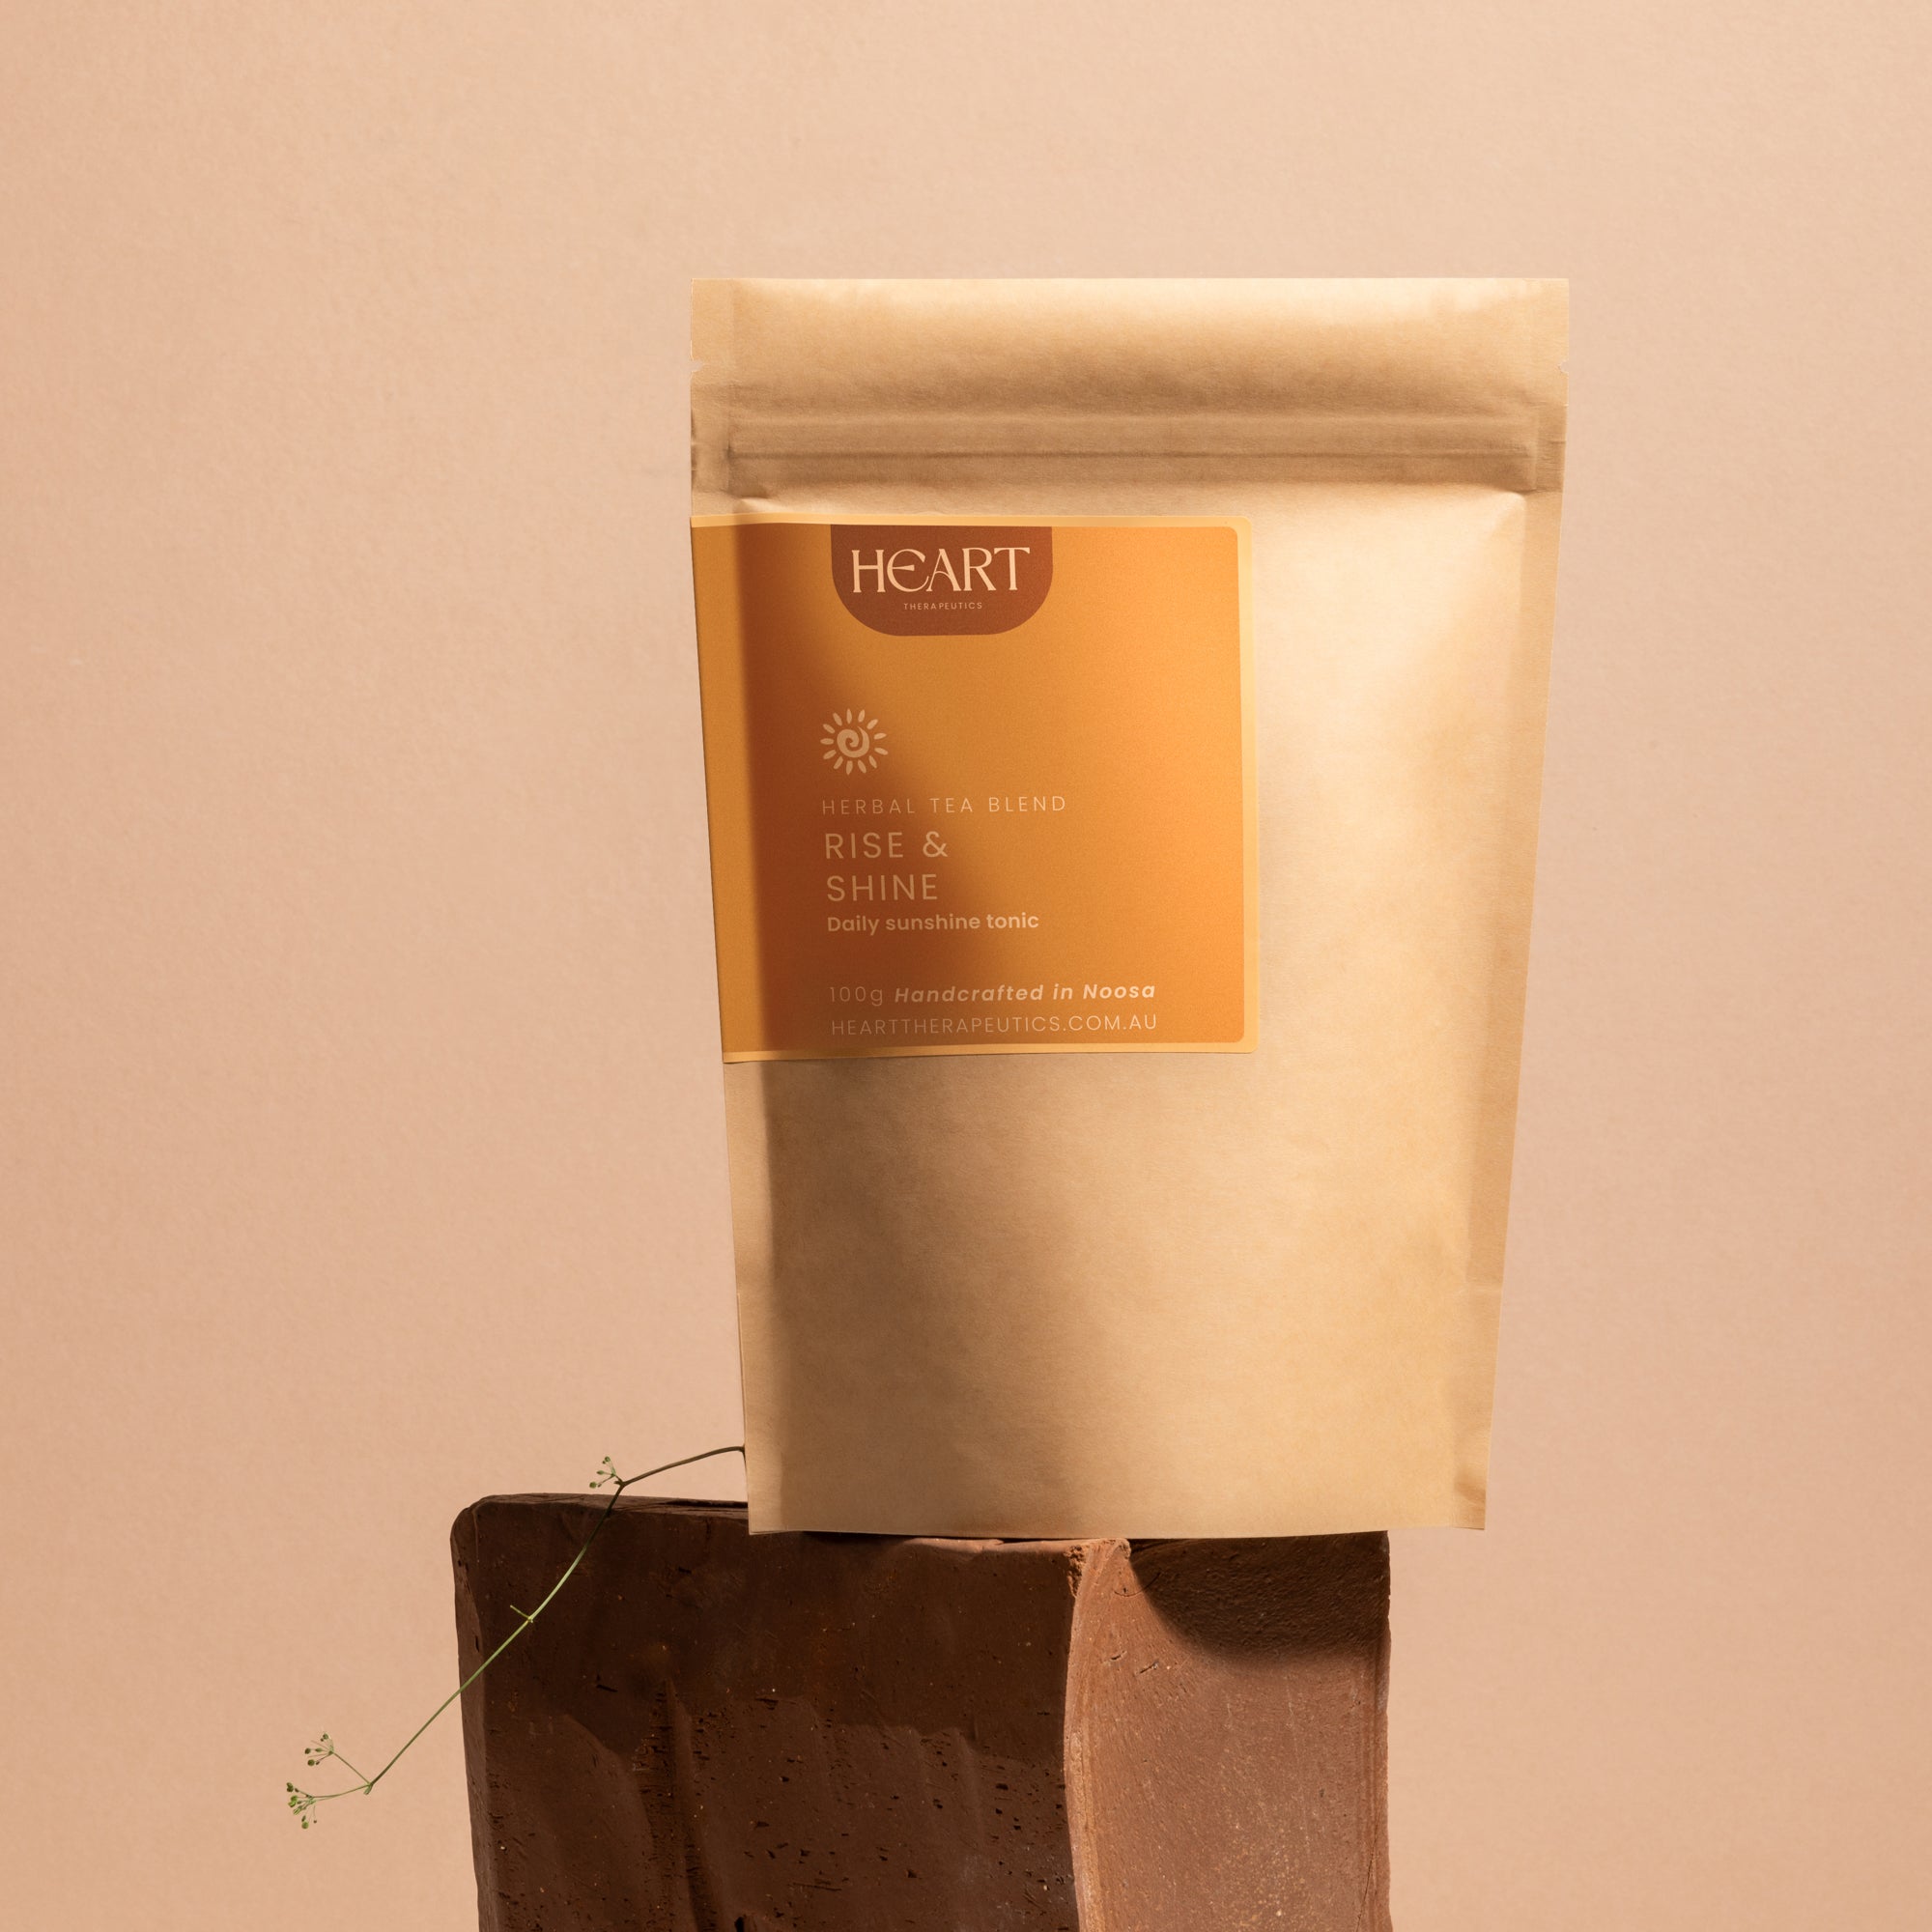 biodegradable bag of rise and shine herbal tea for daily wellness